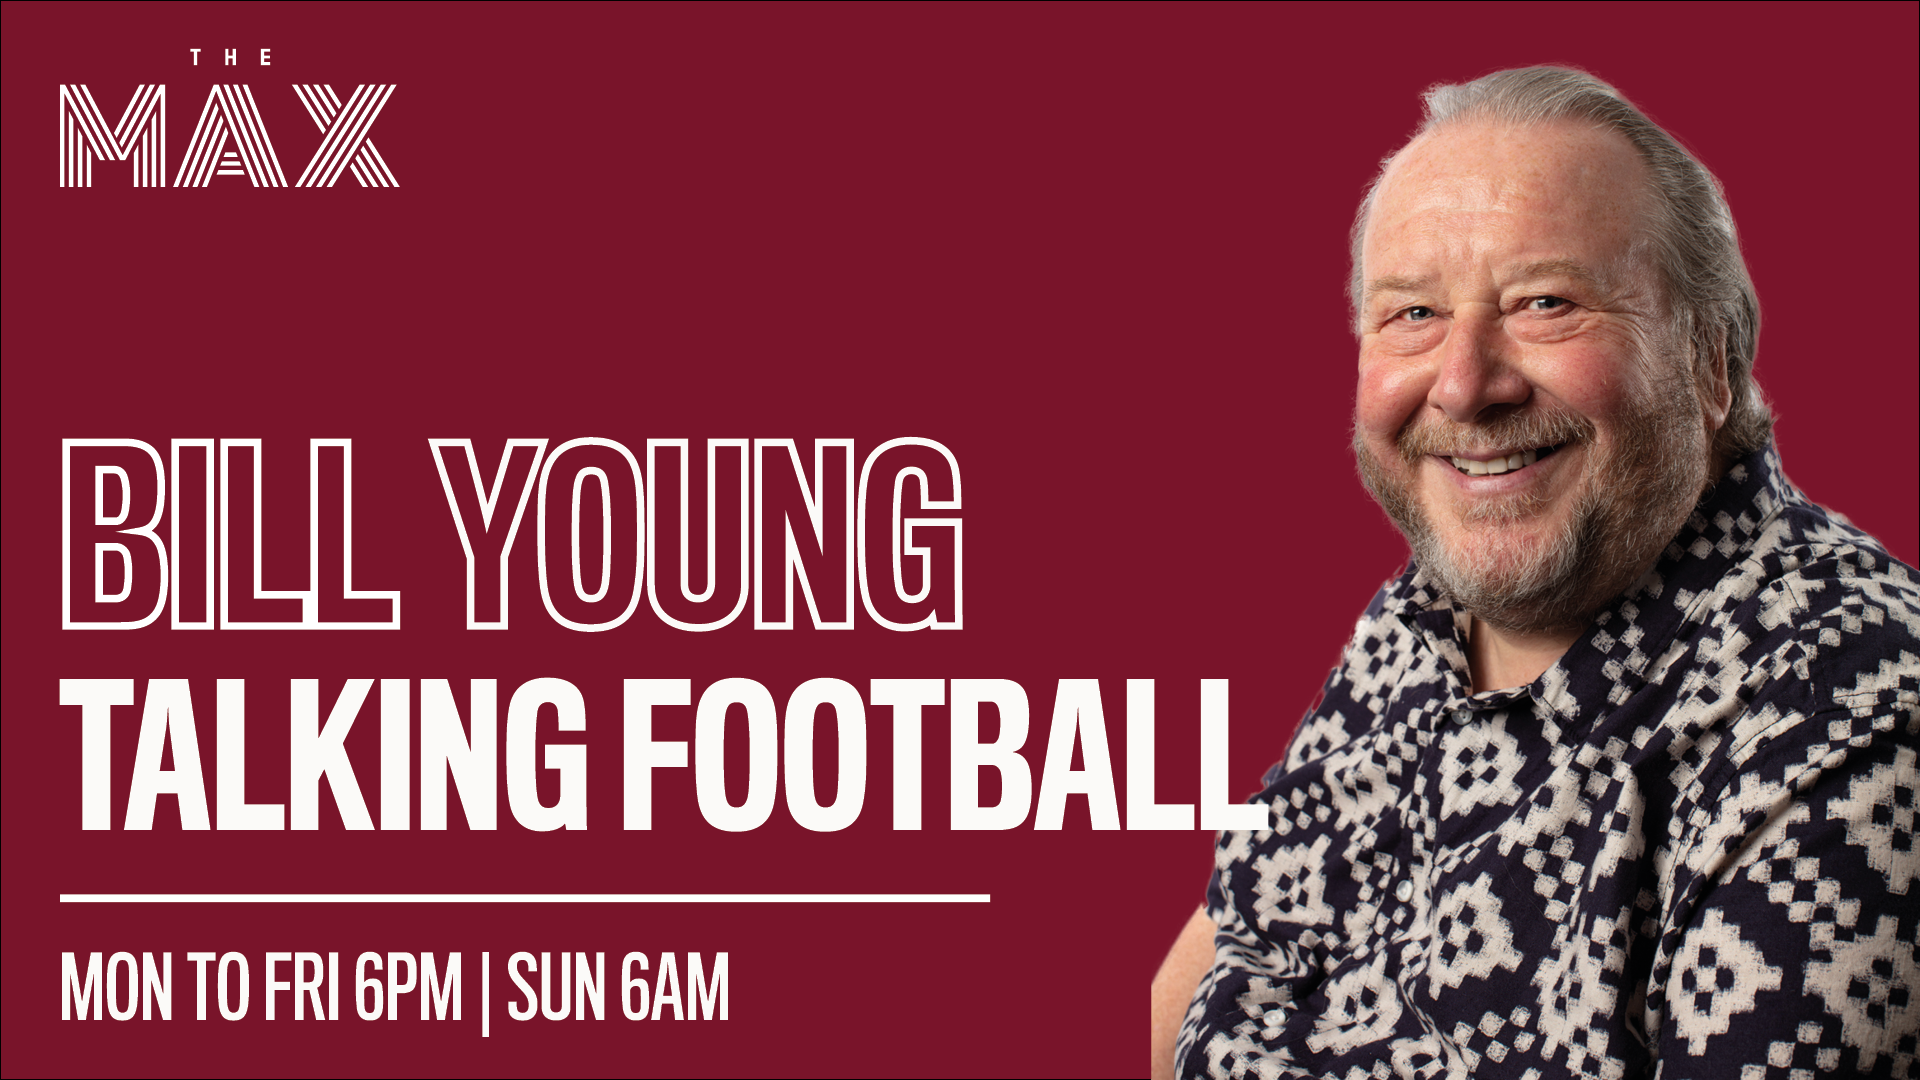 Talking Football with Bill Young - Wednesday 17 March